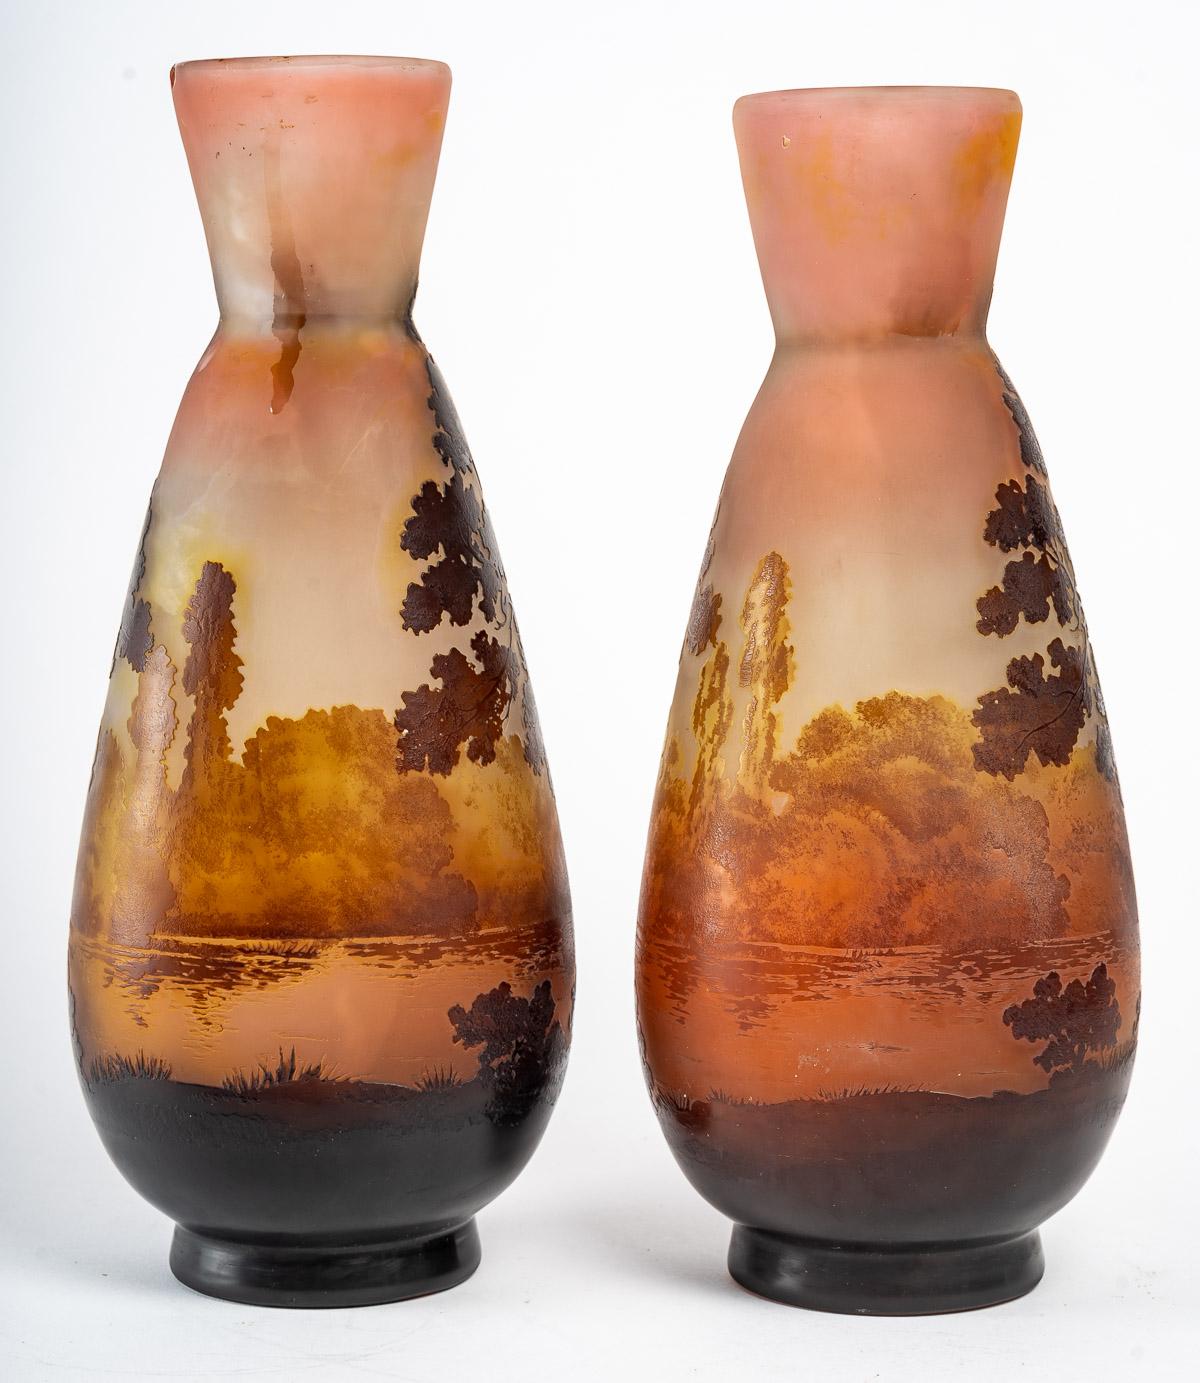 Pair of glass vases by Gallé, early XXth century.
A pair of Gallé glass vases with lake and forest decorations, very nice colour, early 20th century.
Measures: H: 32 cm, D: 14 cm
ref 3272